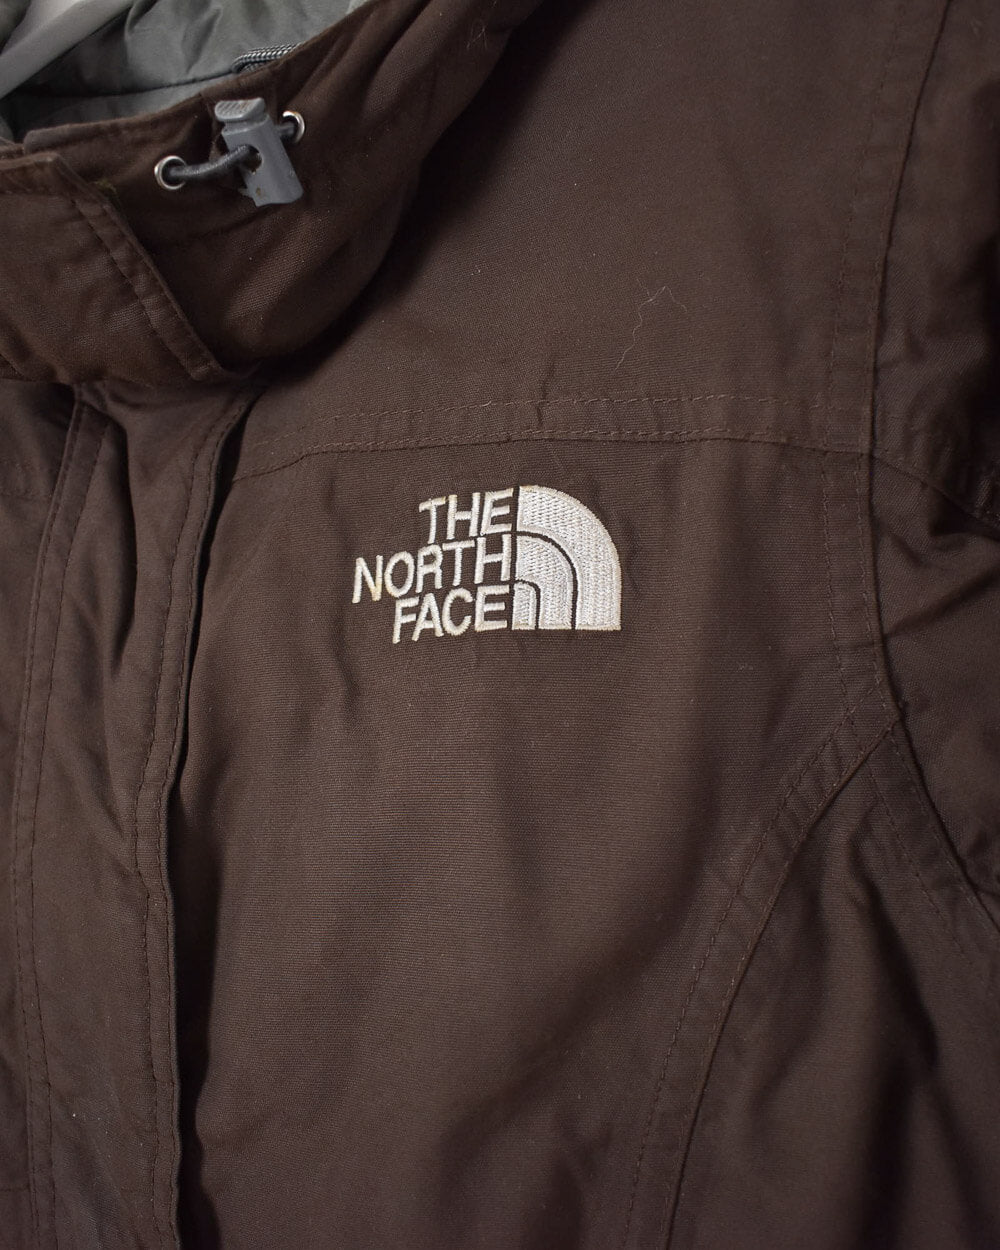 The North Face Hooded Winter Coat - X-Small - Domno Vintage 90s, 80s, 00s Retro and Vintage Clothing 